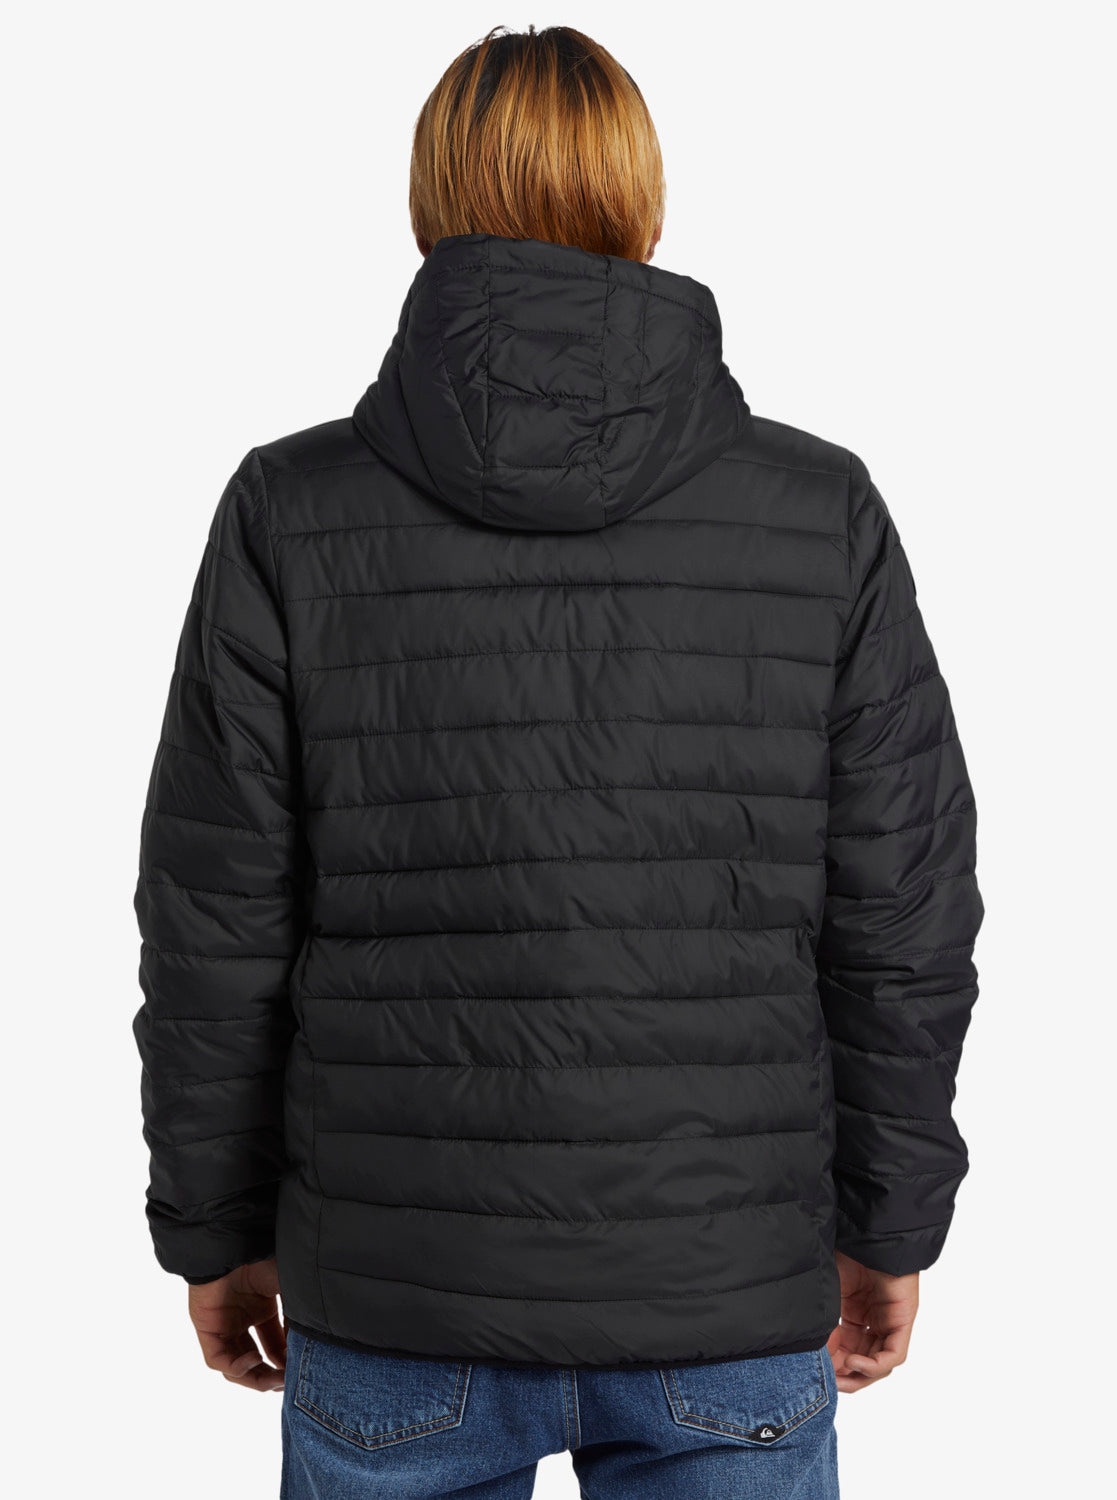 Quiksilver Scaly Hooded Puffer Jacket in black on model from back